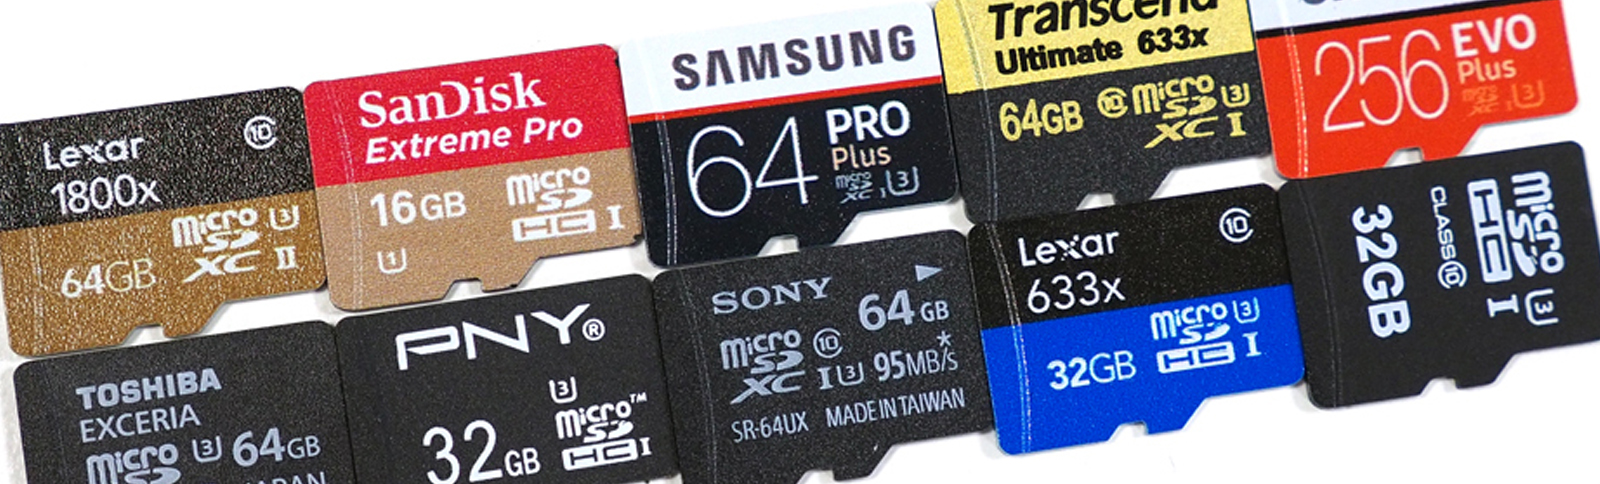 memory cards to dvd in Oxfordshire UK